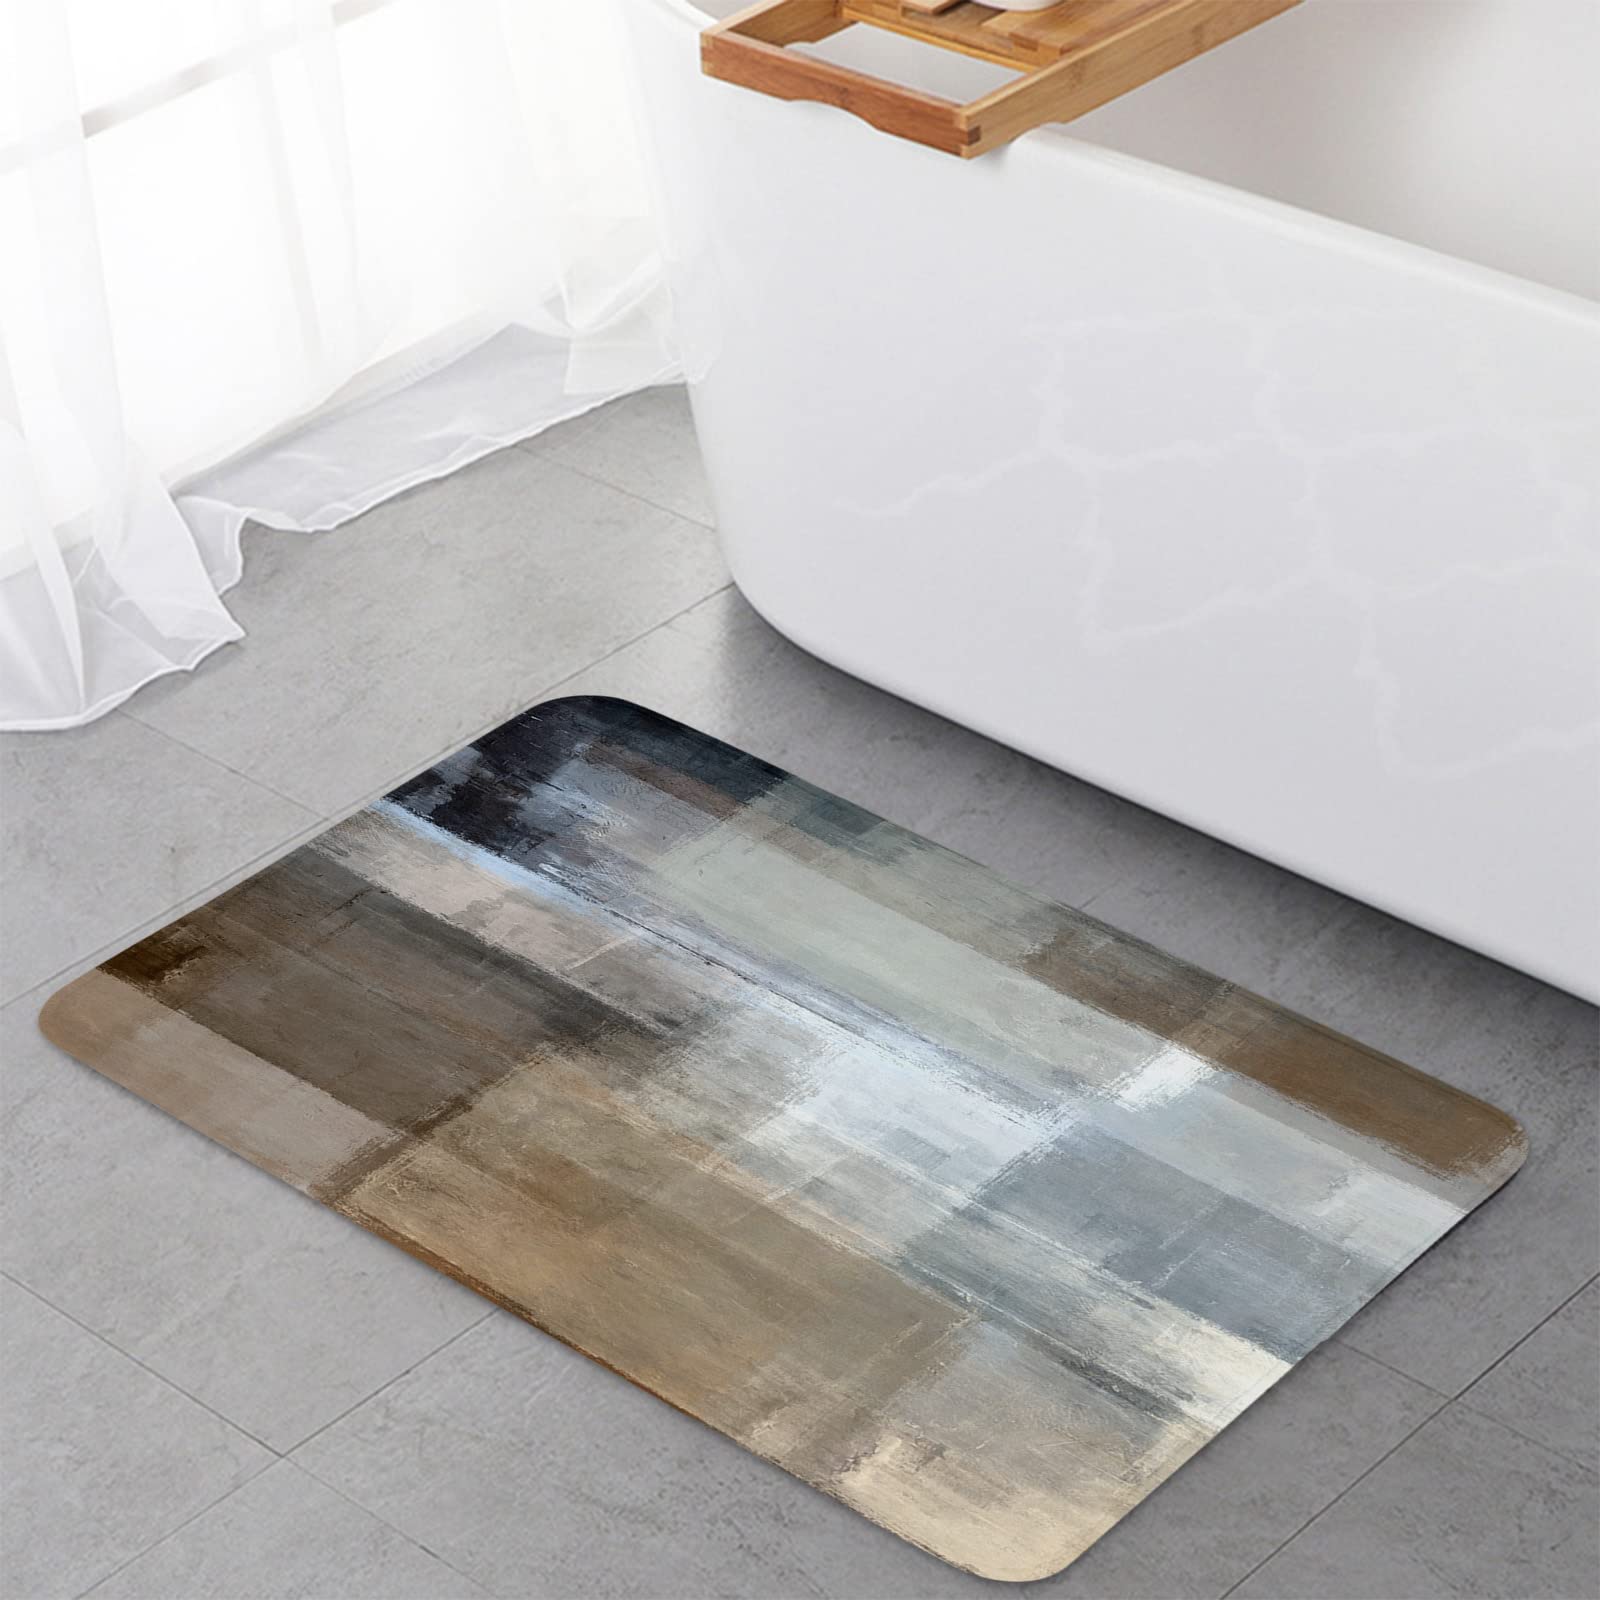 Abstract Oil Painting 1 Piece Water Absorbent Door Mat Anti-Skid Memory Foam Cushioned Rug Comfort Standing Floor Mat for Office Home Bathroom Kitchen 18x30 Inch Geometric Brown Artwork